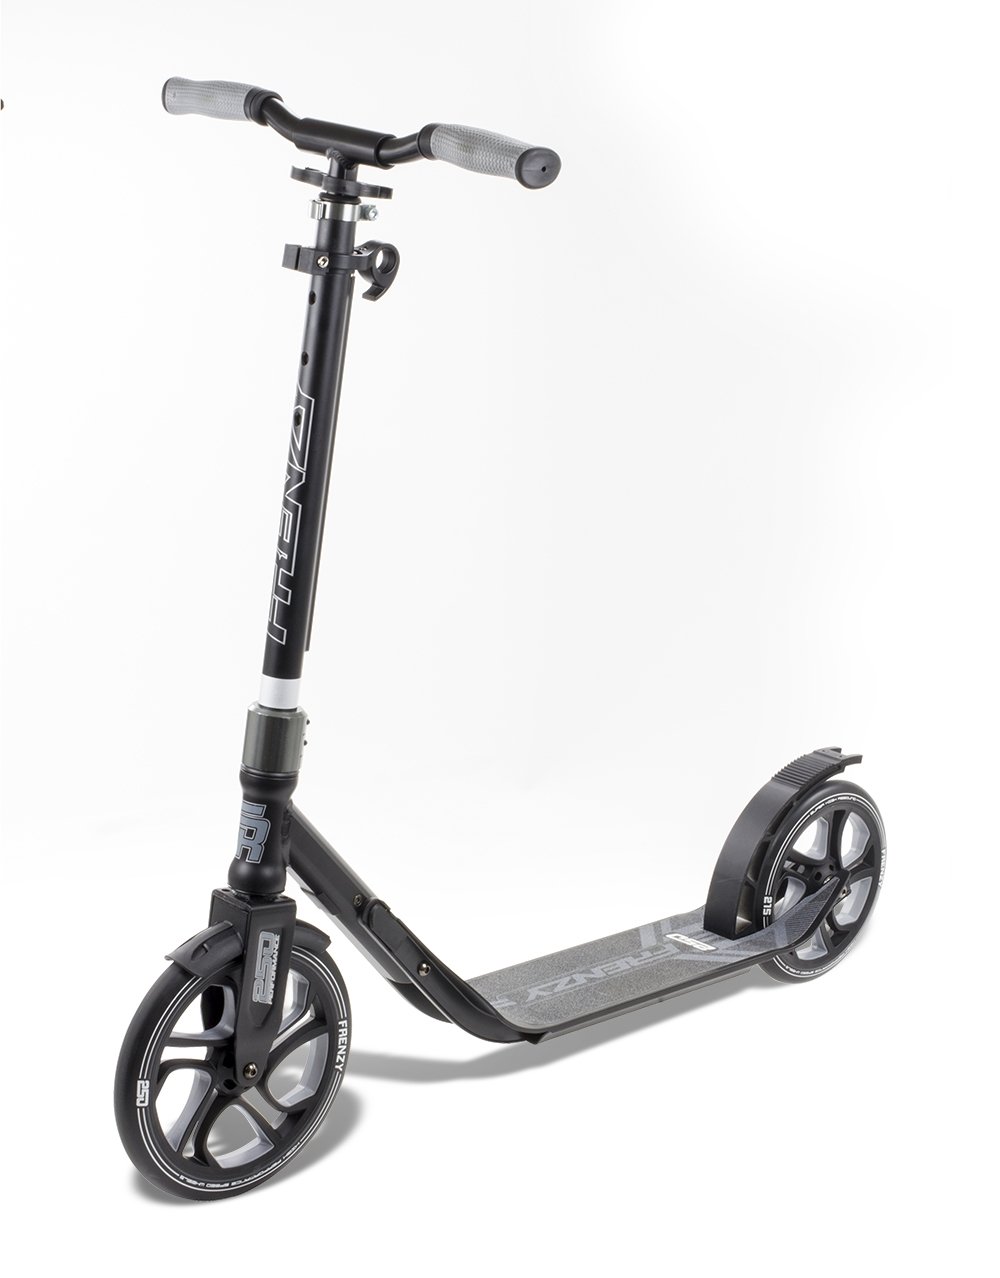 An image of Frenzy 250mm Recreational Scooter - Black